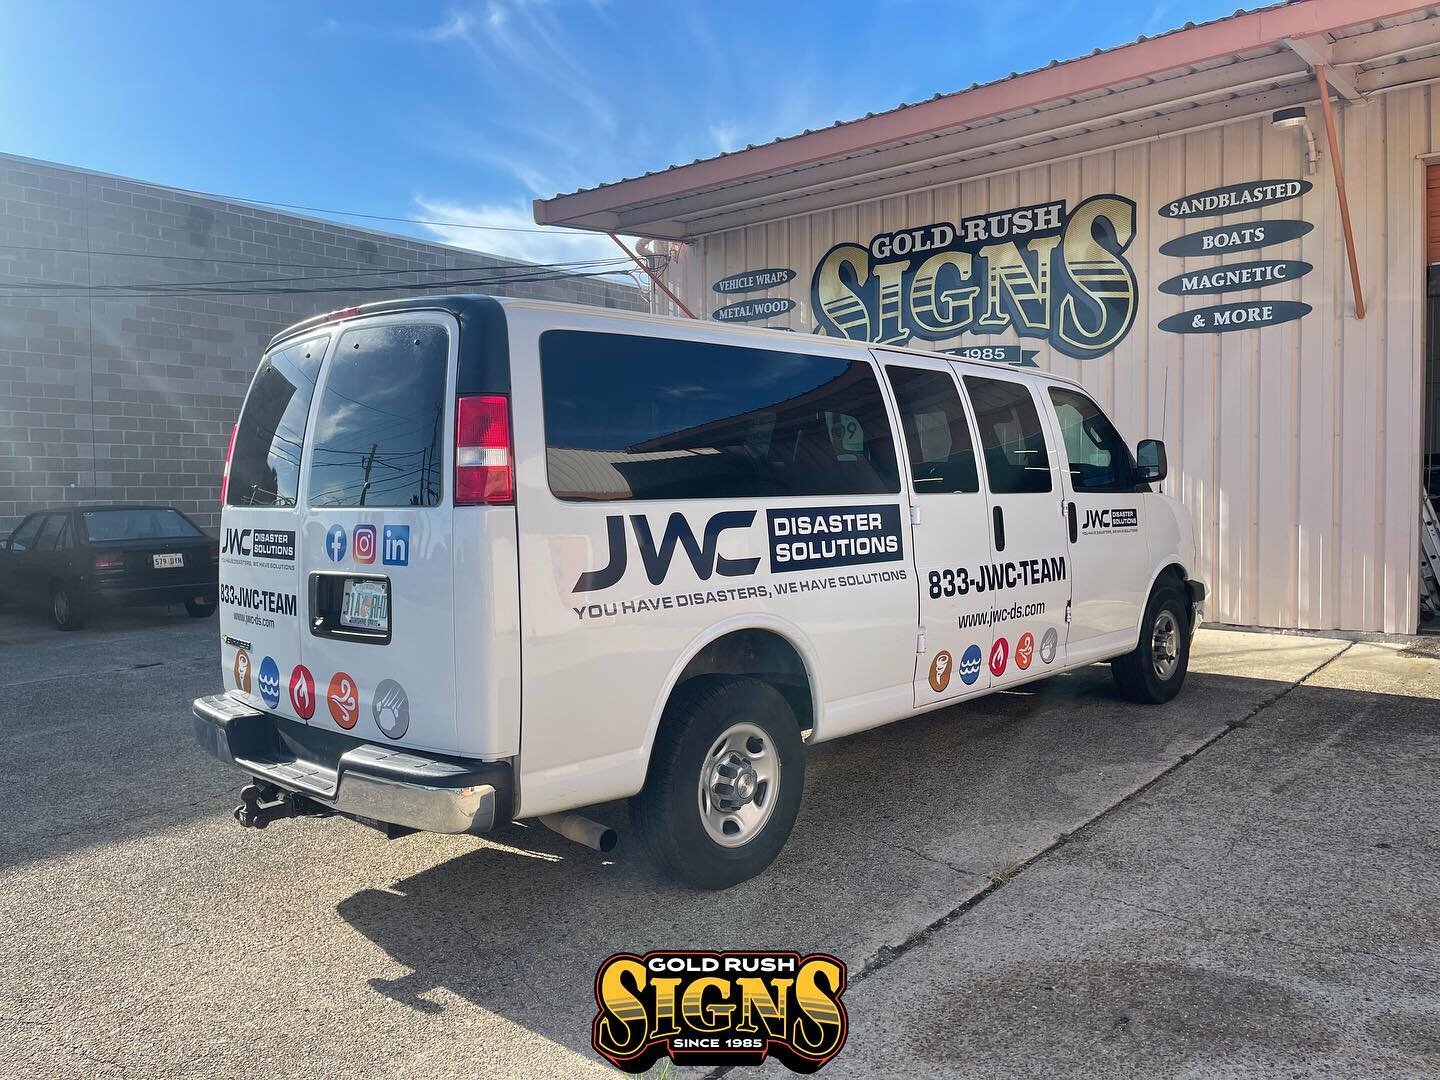 JWC Disaster Solutions struck gold with this new design! ⚡️ Can&rsquo;t wait to see the fleet out on the road.